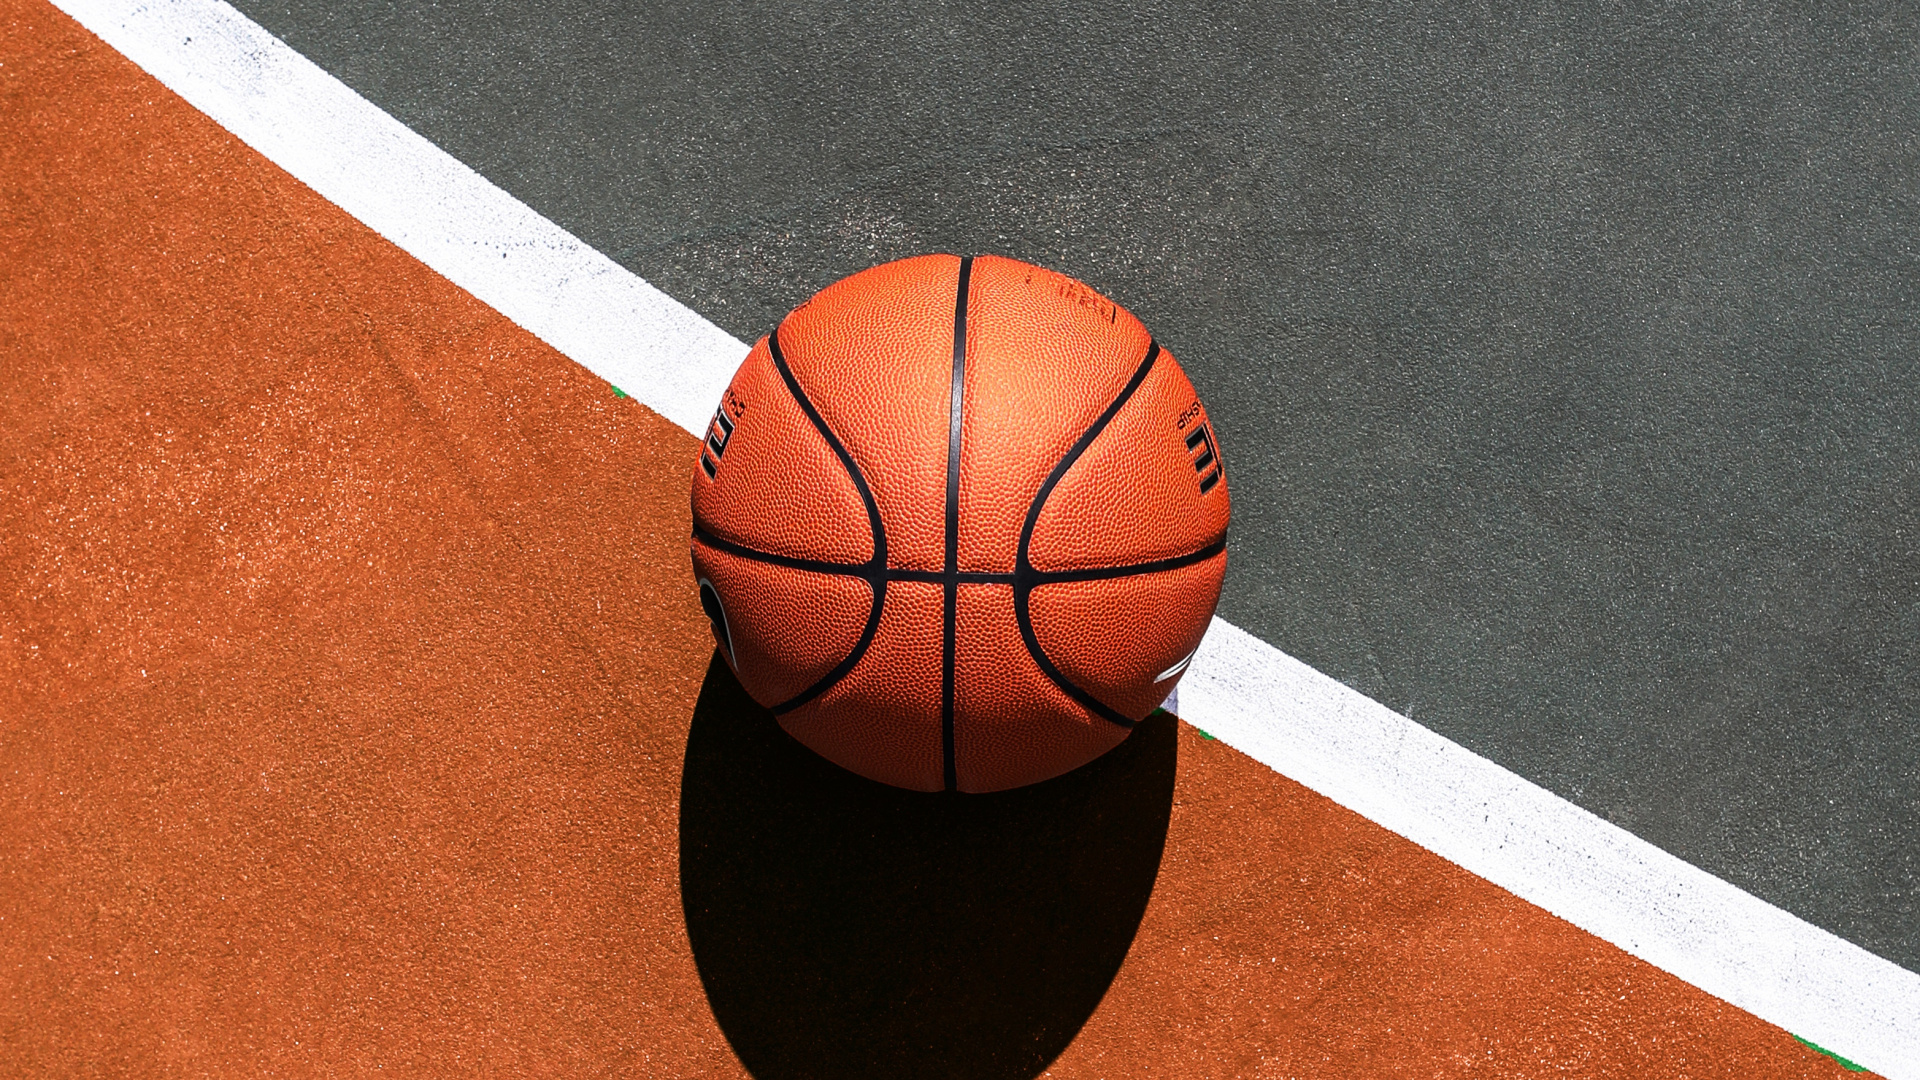 Basketball on Blue and White Basketball Court. Wallpaper in 1920x1080 Resolution